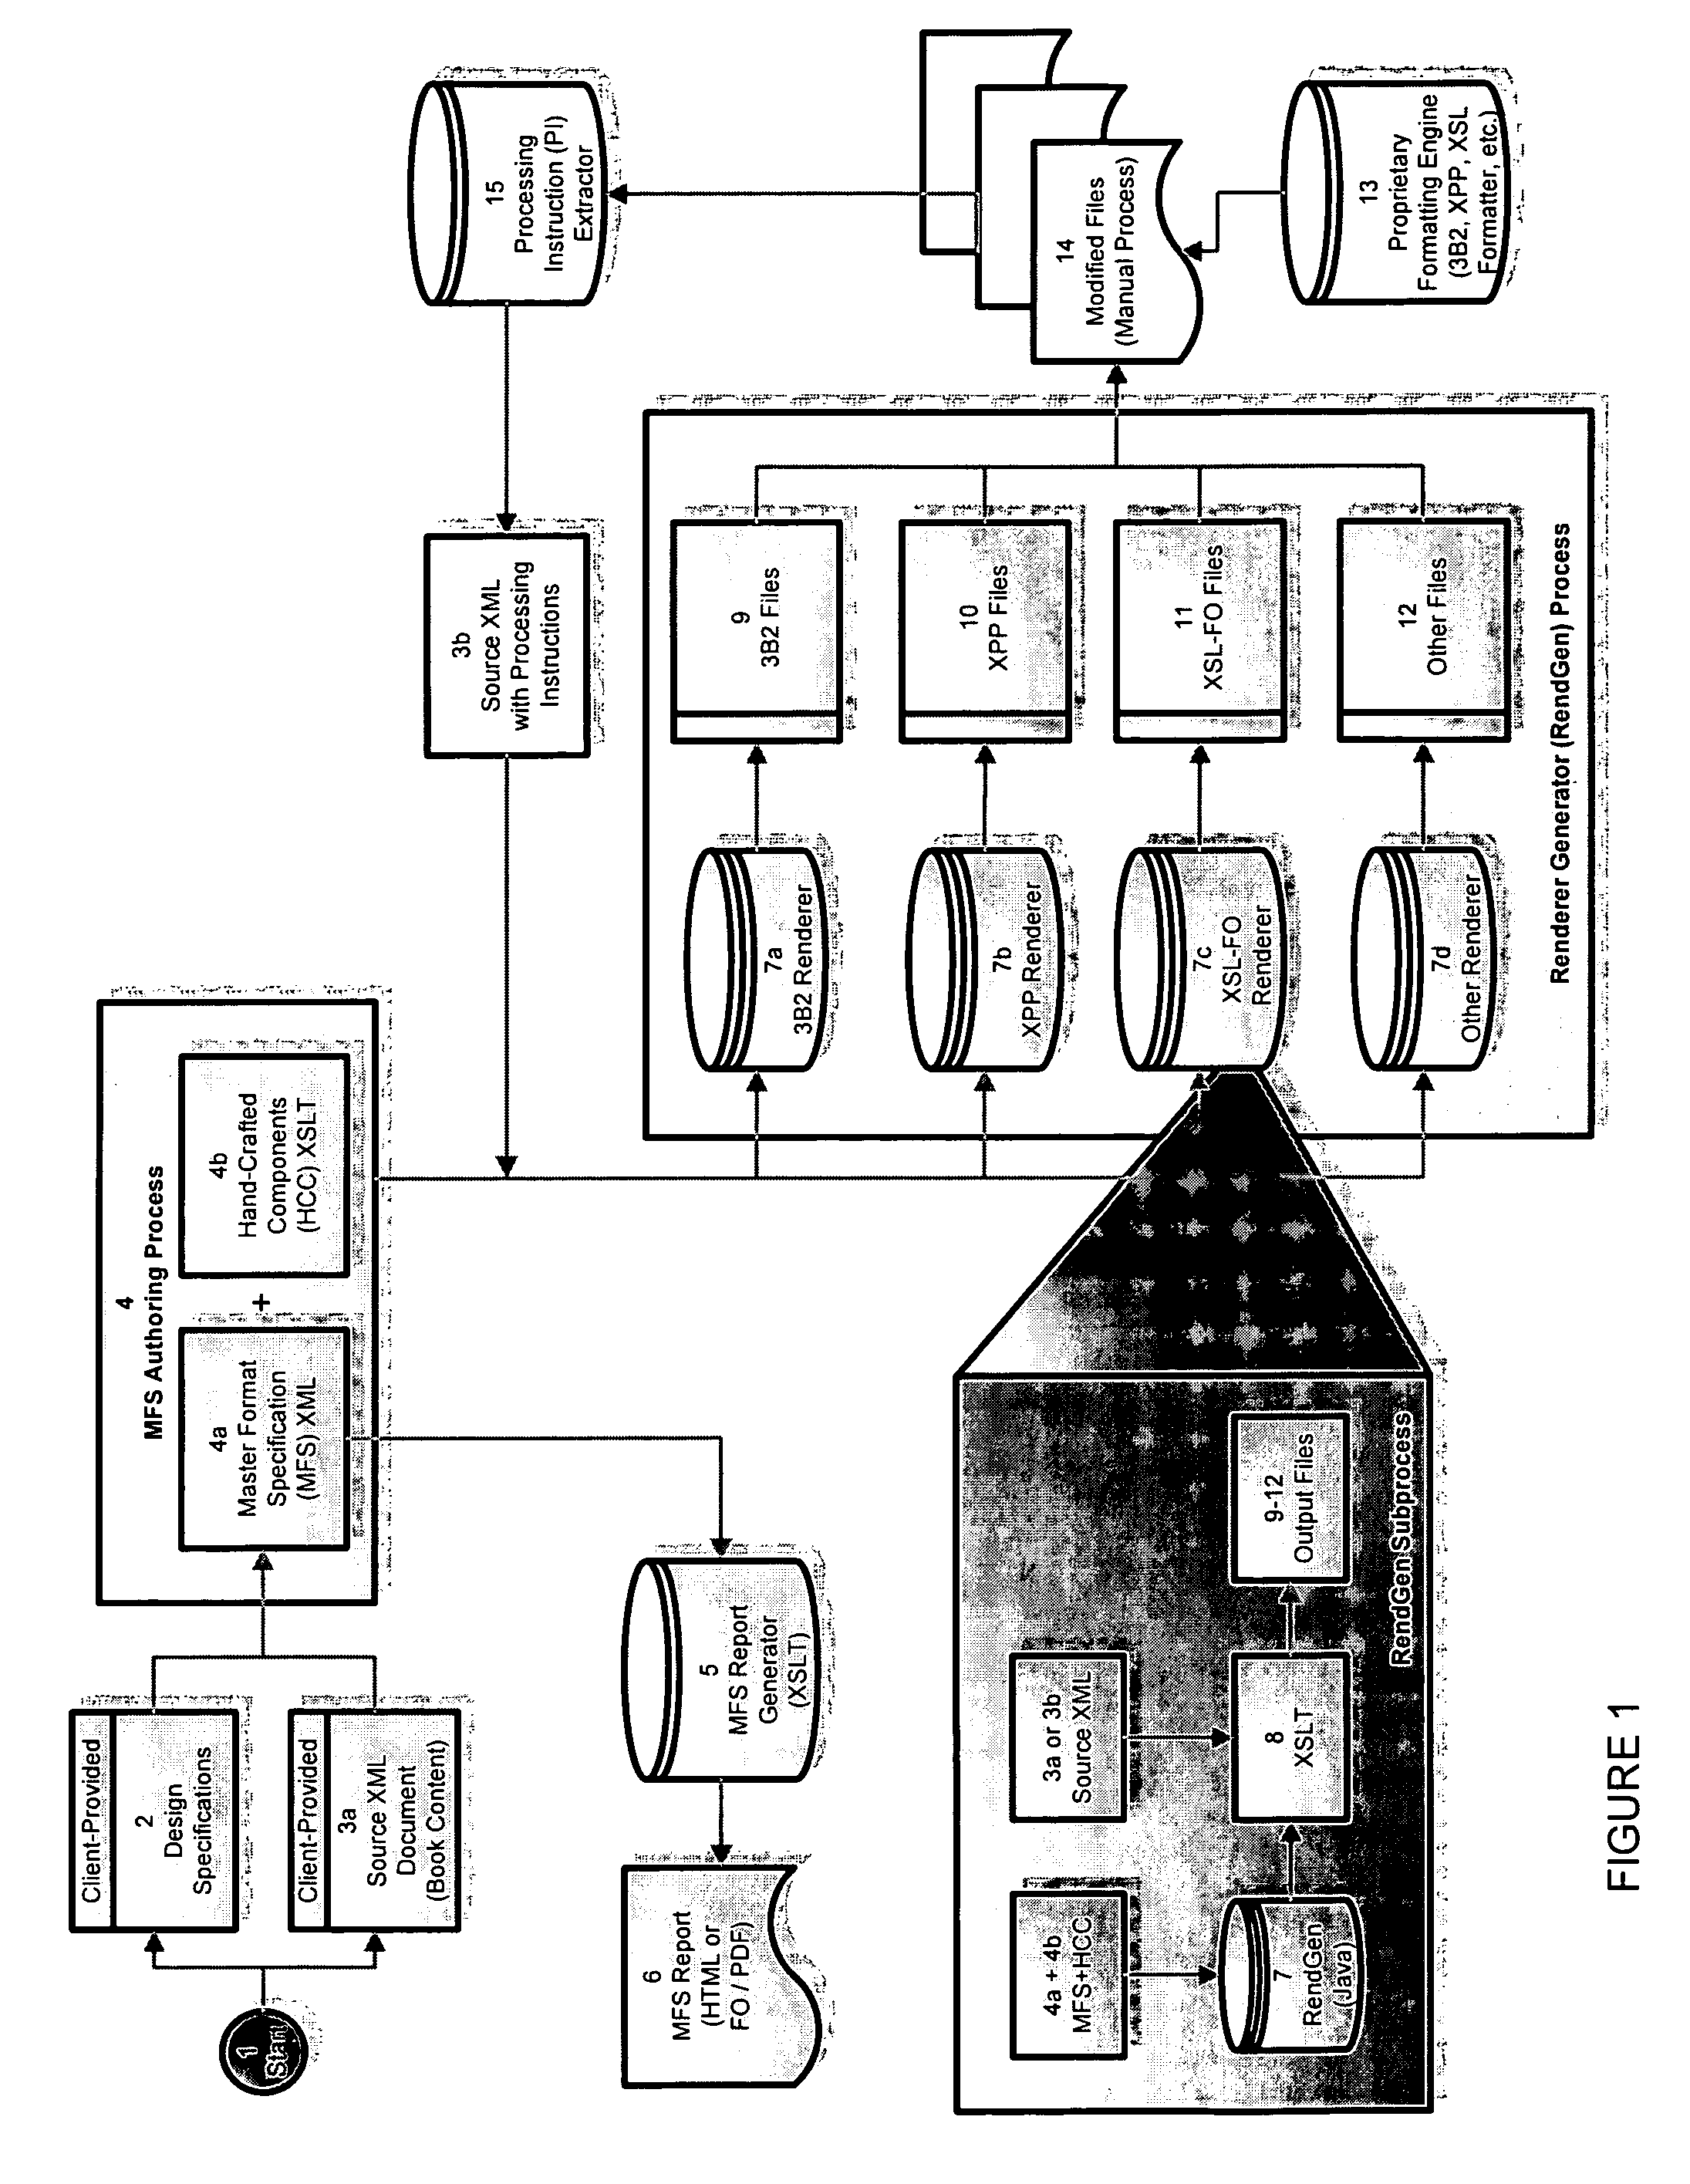 Electronic publishing system and method for managing publishing requirements in a neutral format